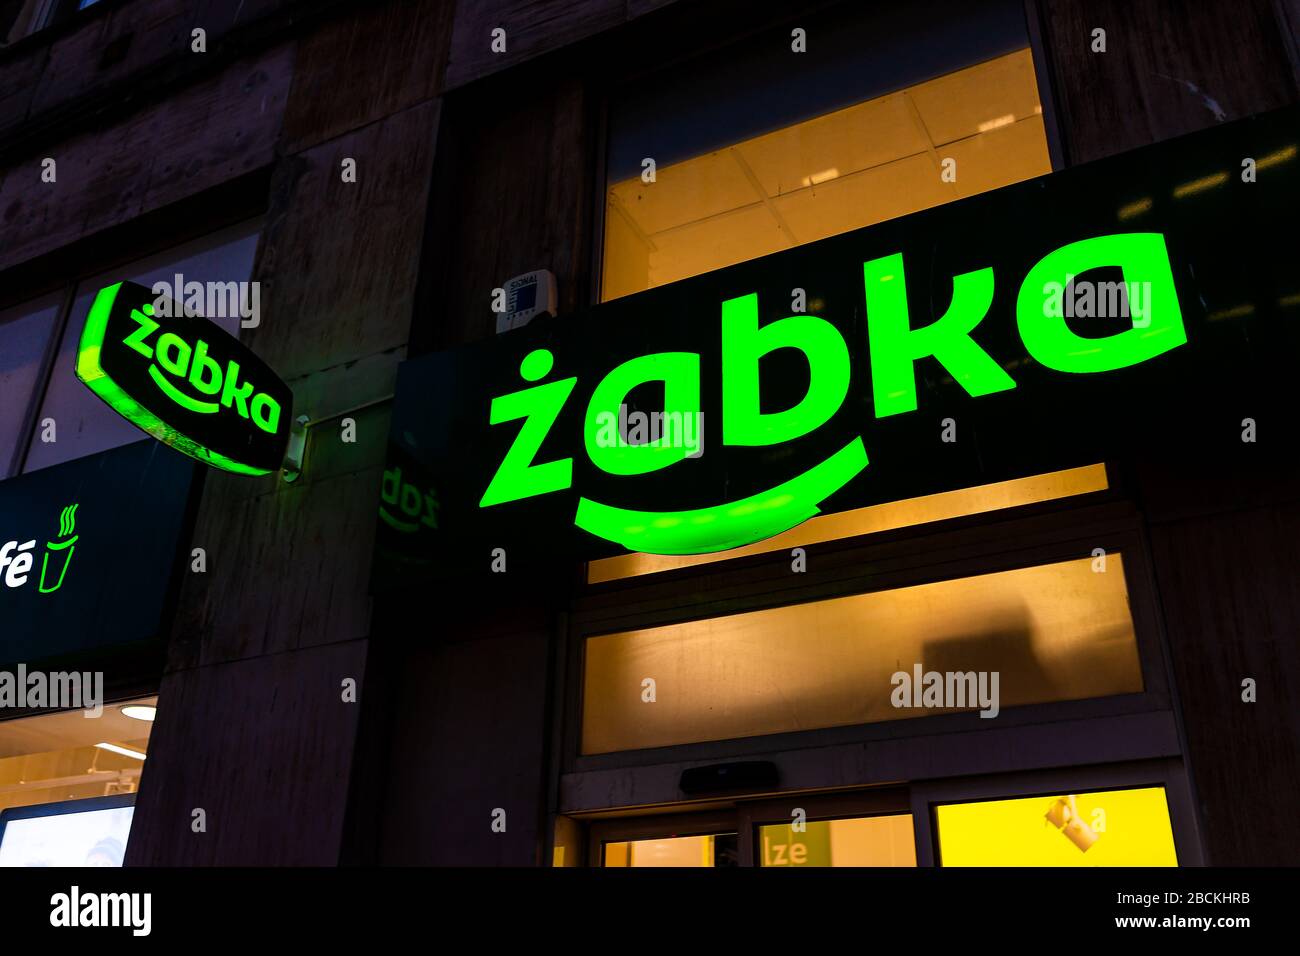 Warsaw, Poland - January 22, 2019: Illuminated sign closeup for Zabka green grocery supermarket convenience store on street in downtown center at nigh Stock Photo